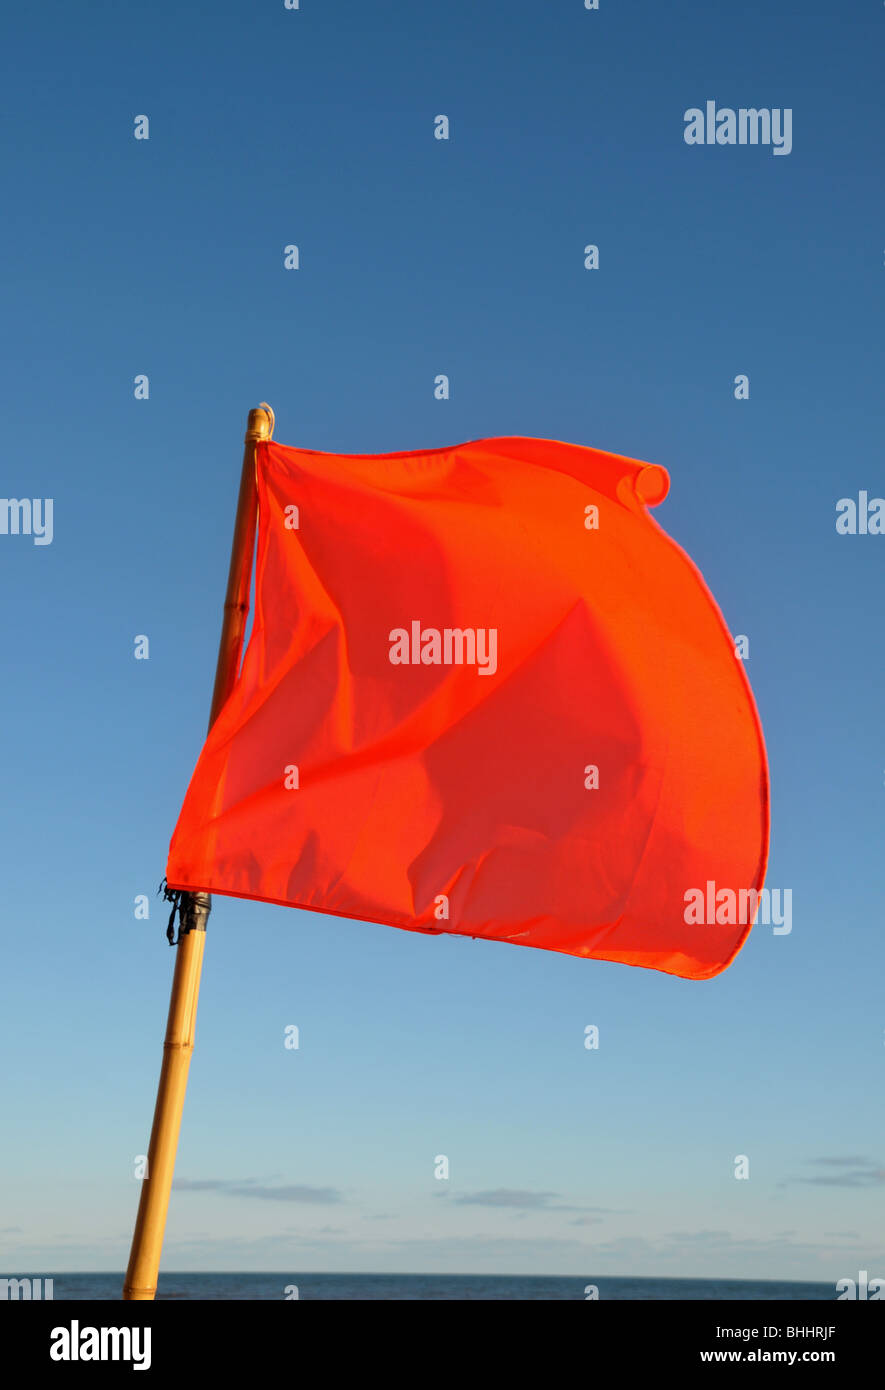 A red flag on the beach blowing in the wind. Stock Photo